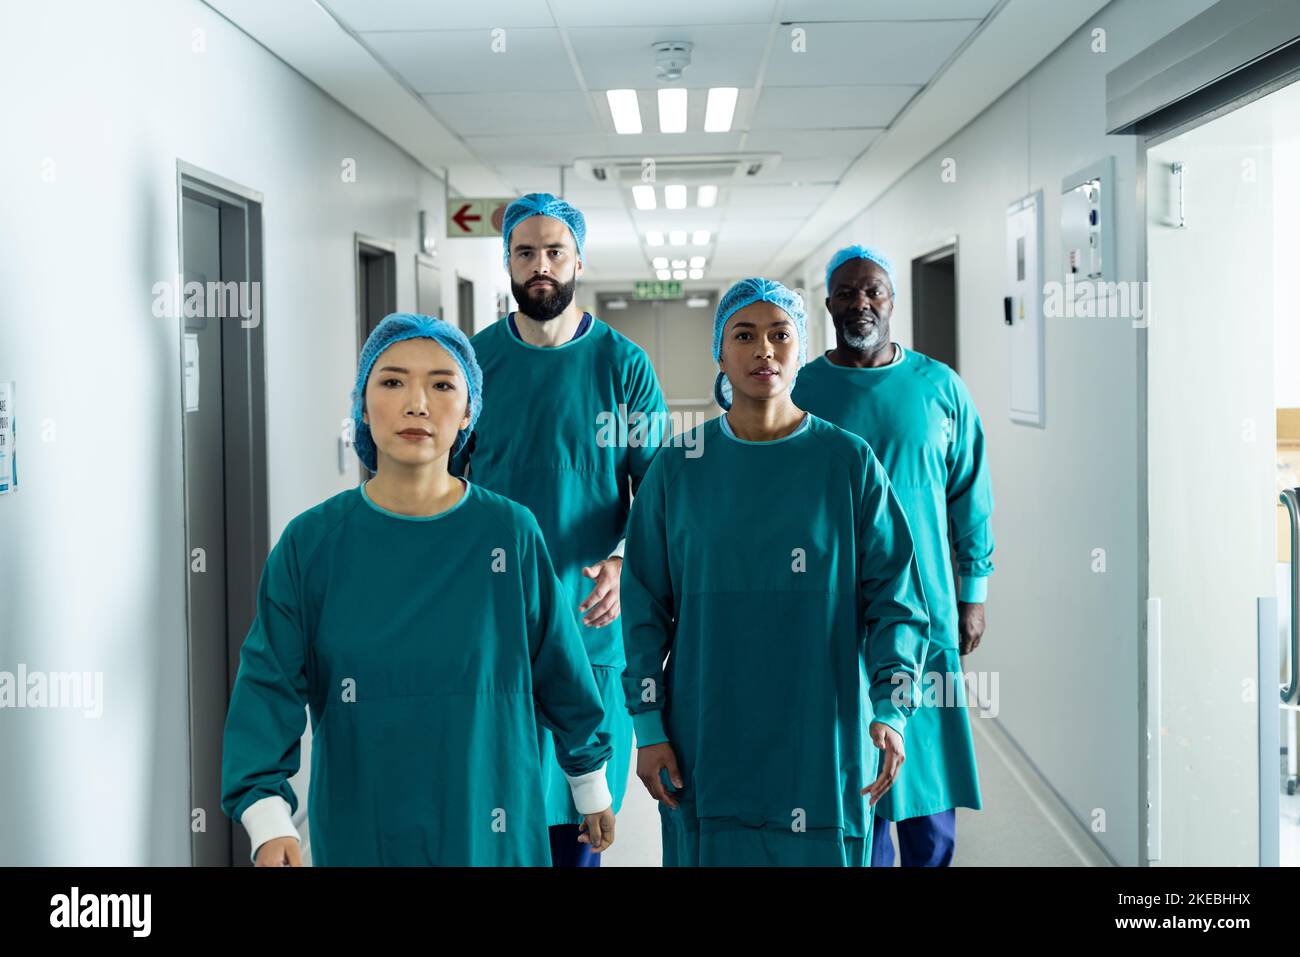 Diverse group of four surgeons in surgical caps and gowns walking in hospital corridor Stock Photo